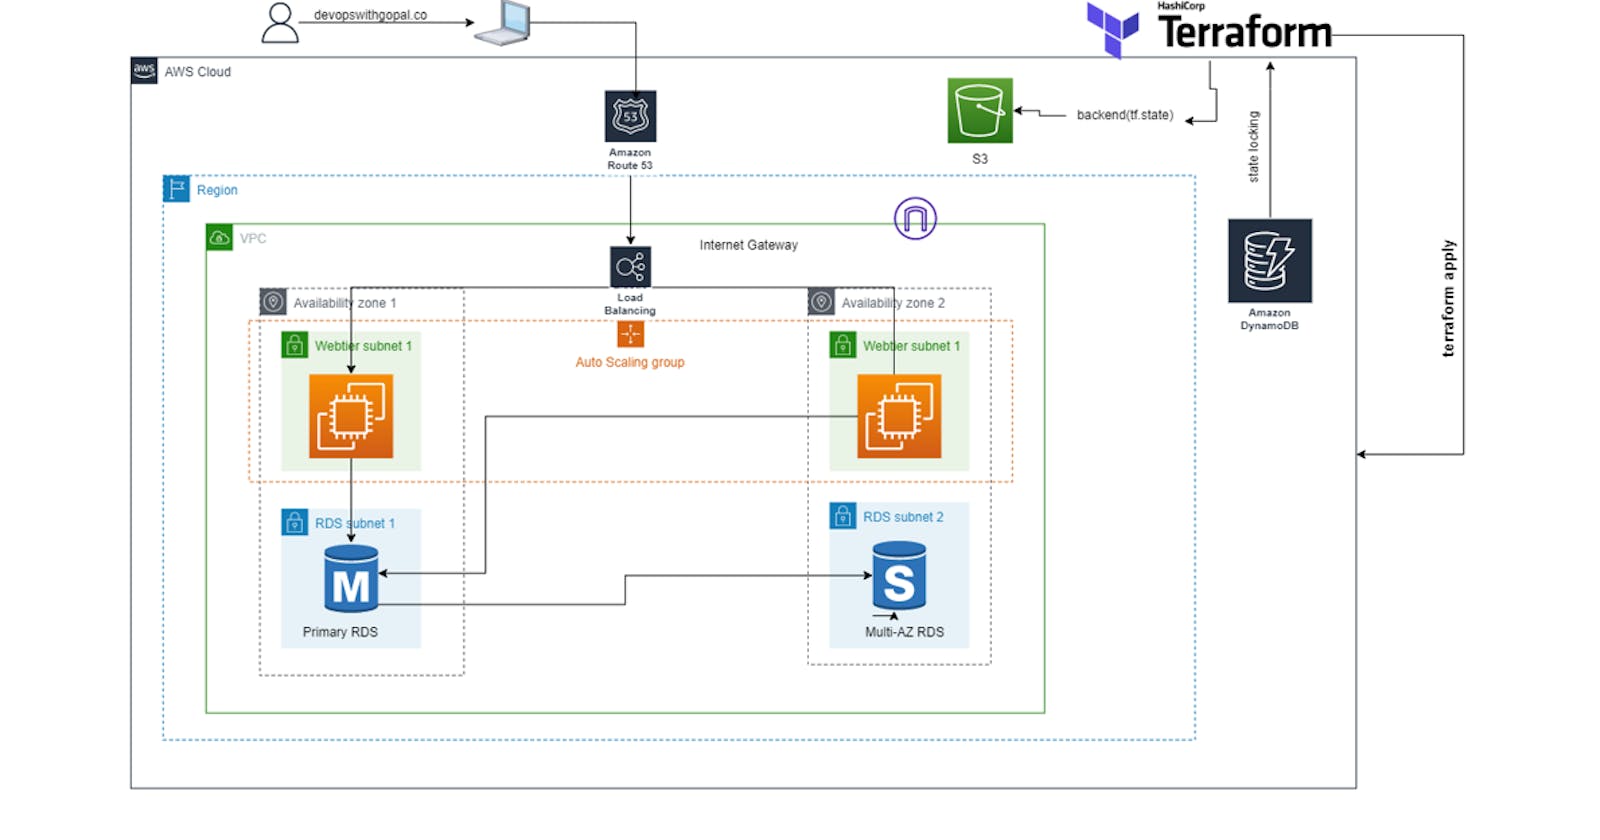 Implement 2-tier architecture in AWS using Terraform